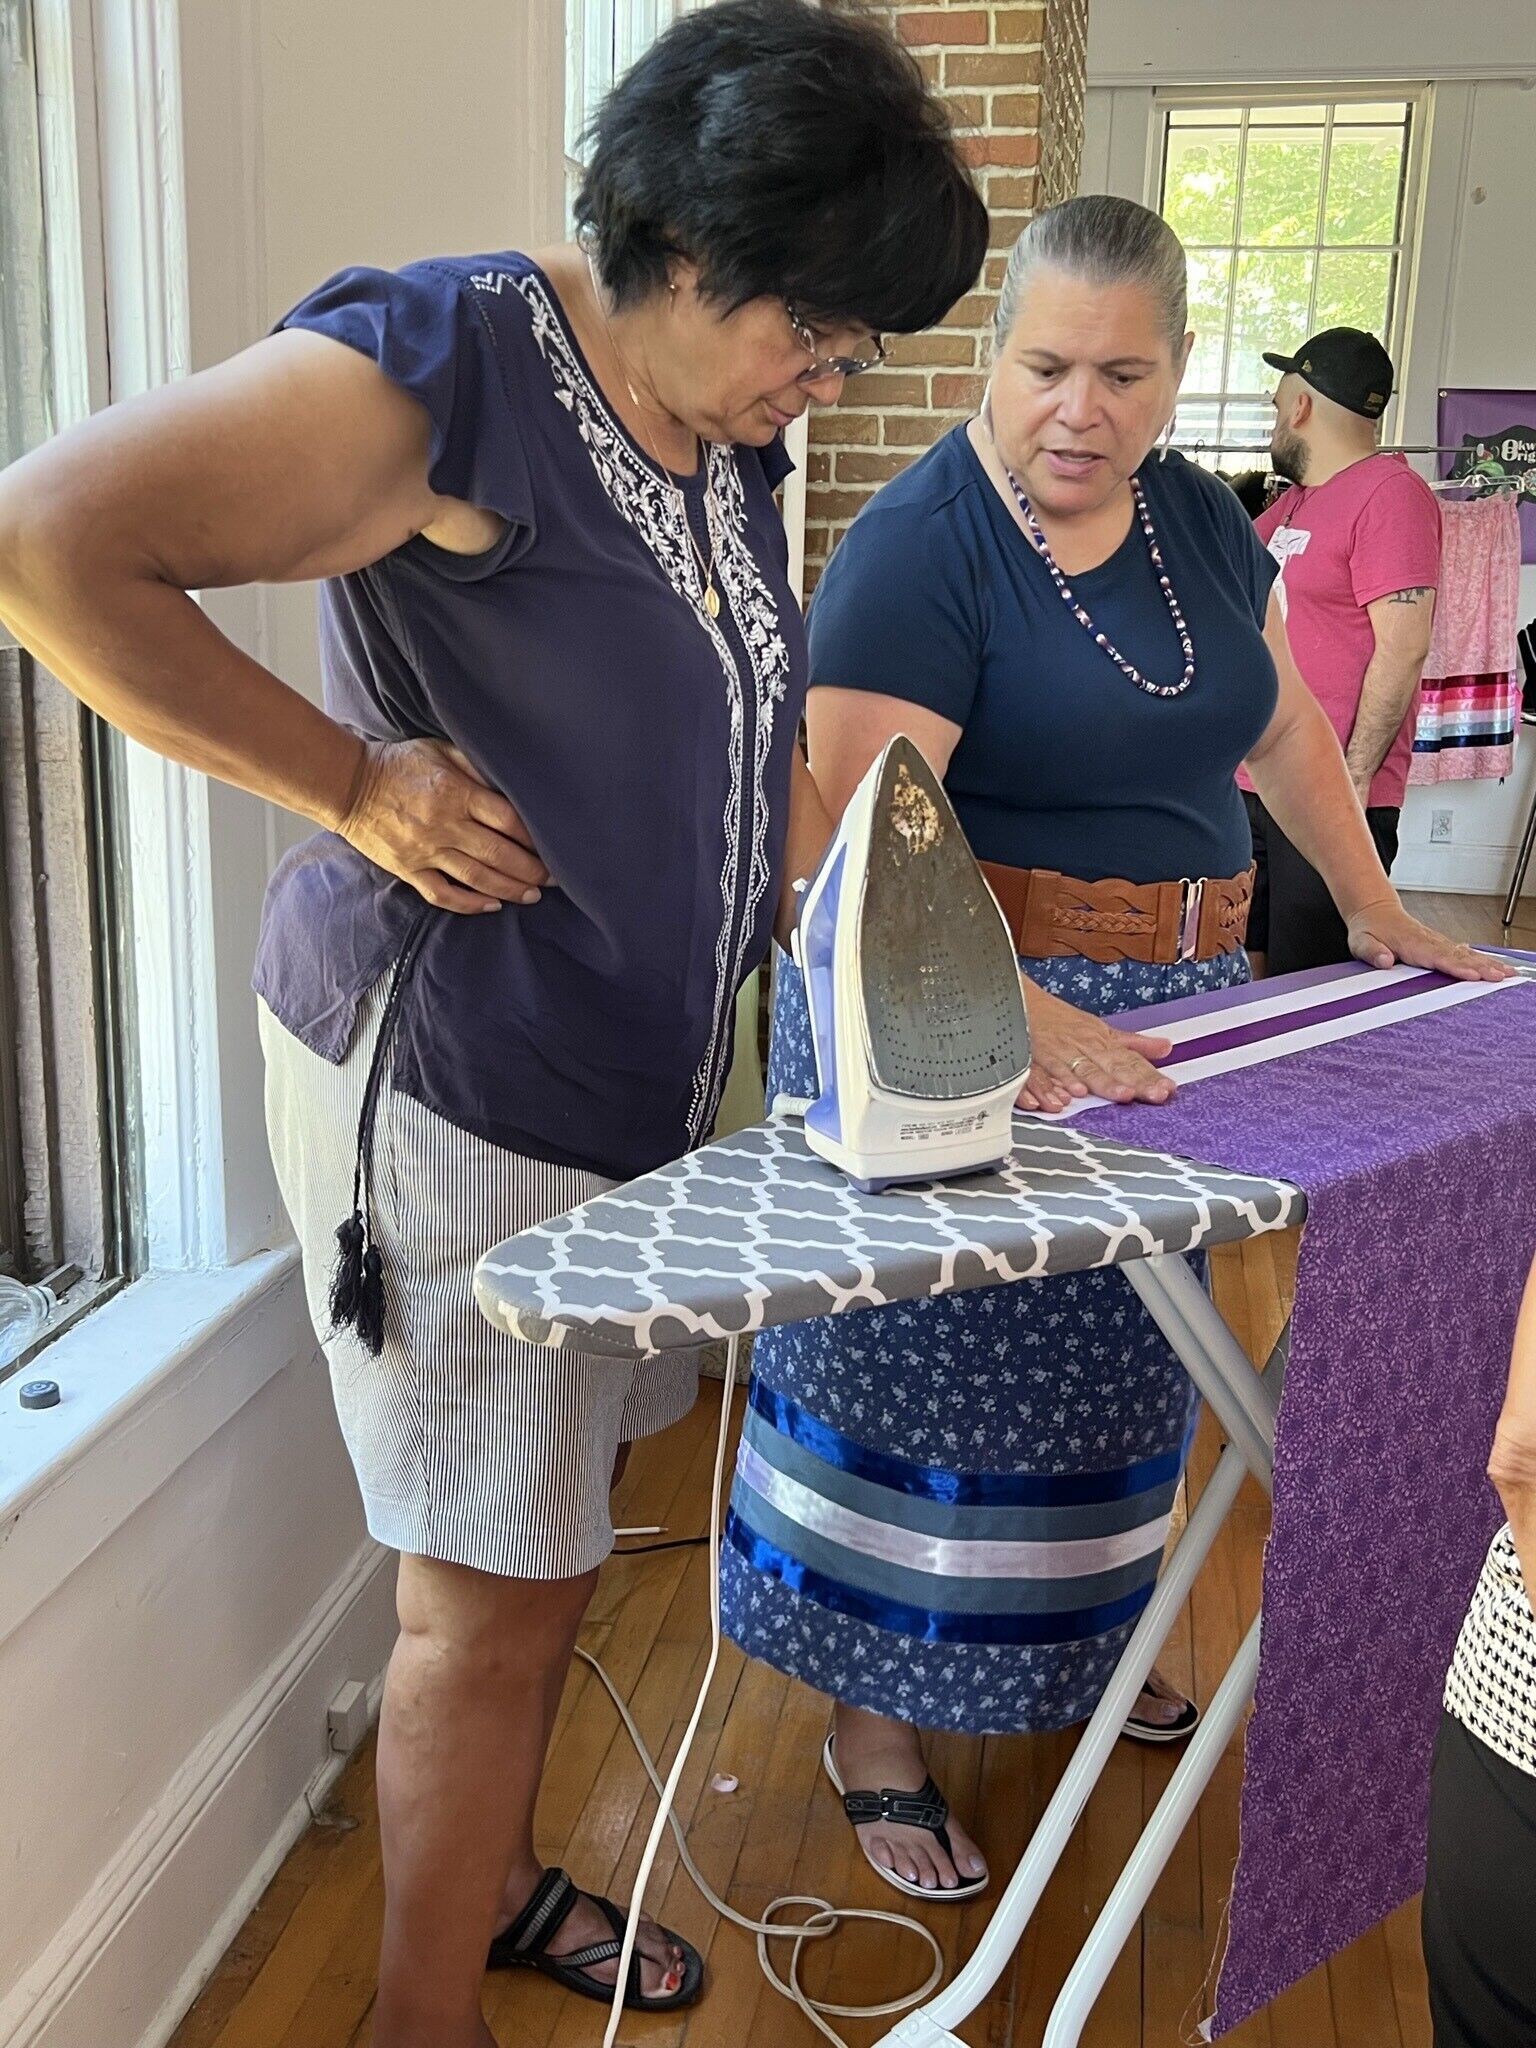 Two people stand over an ironing board.